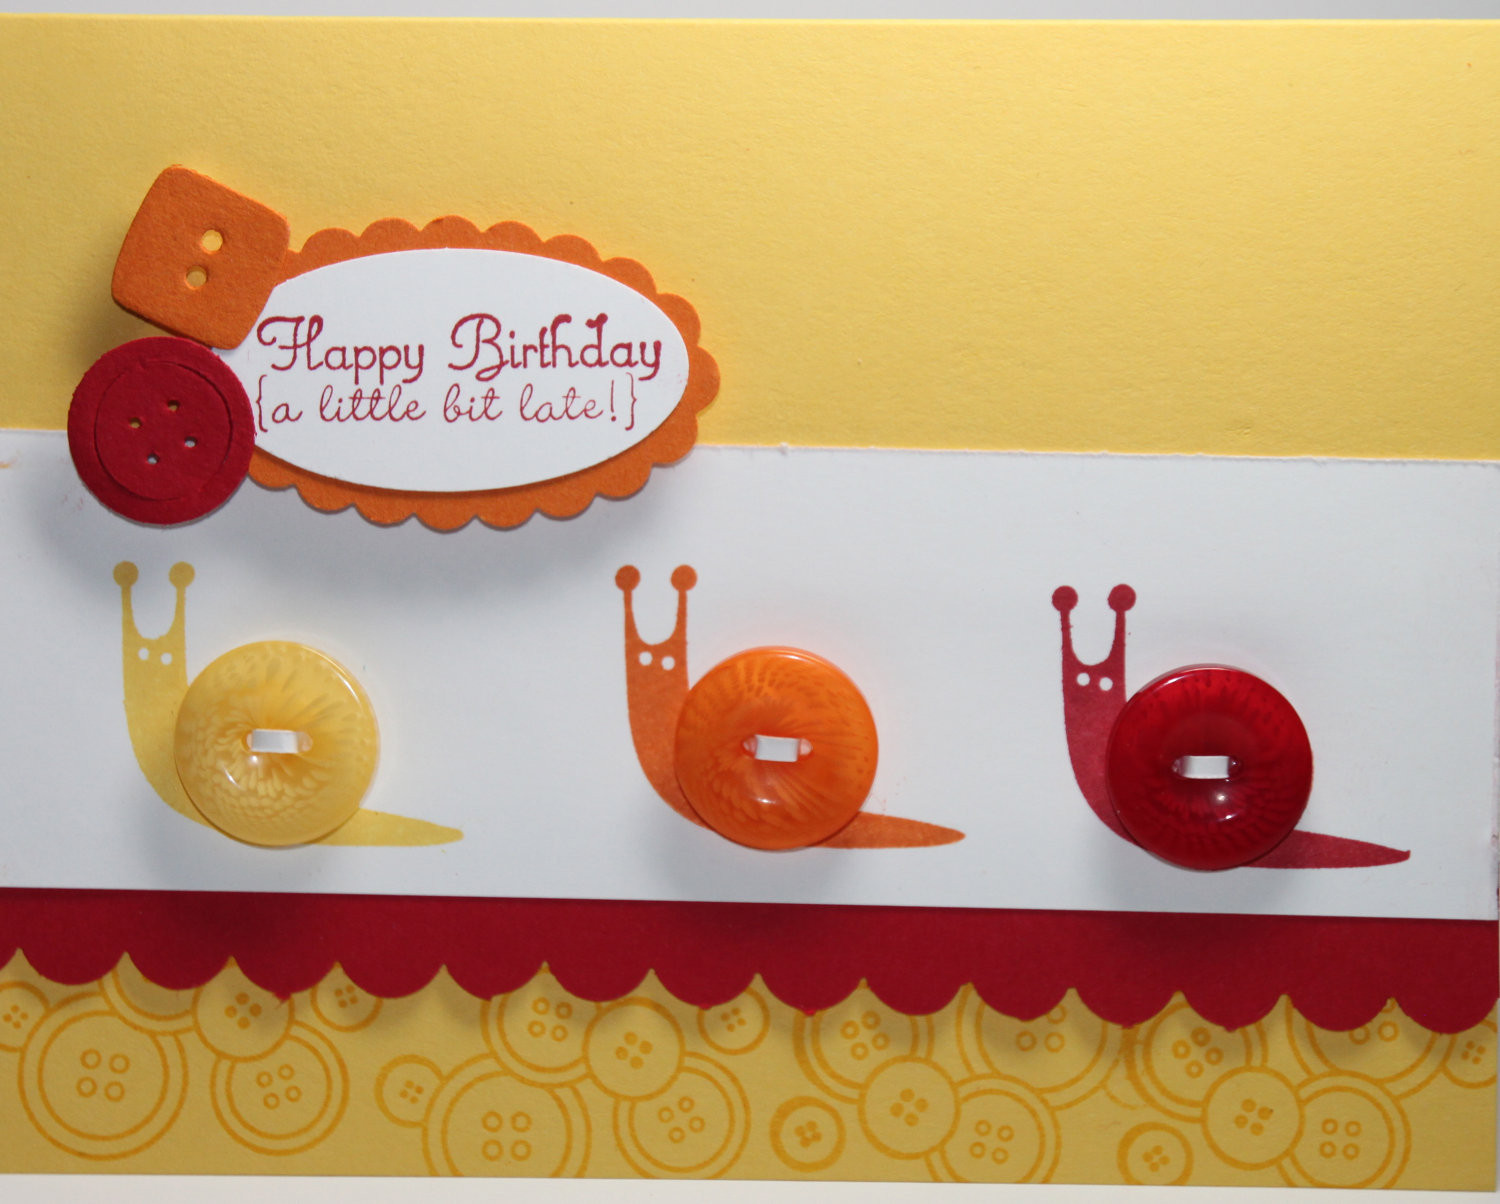 Happy Belated Birthday Cards
 Happy Belated Birthday Snail Stampin Up Handmade Card